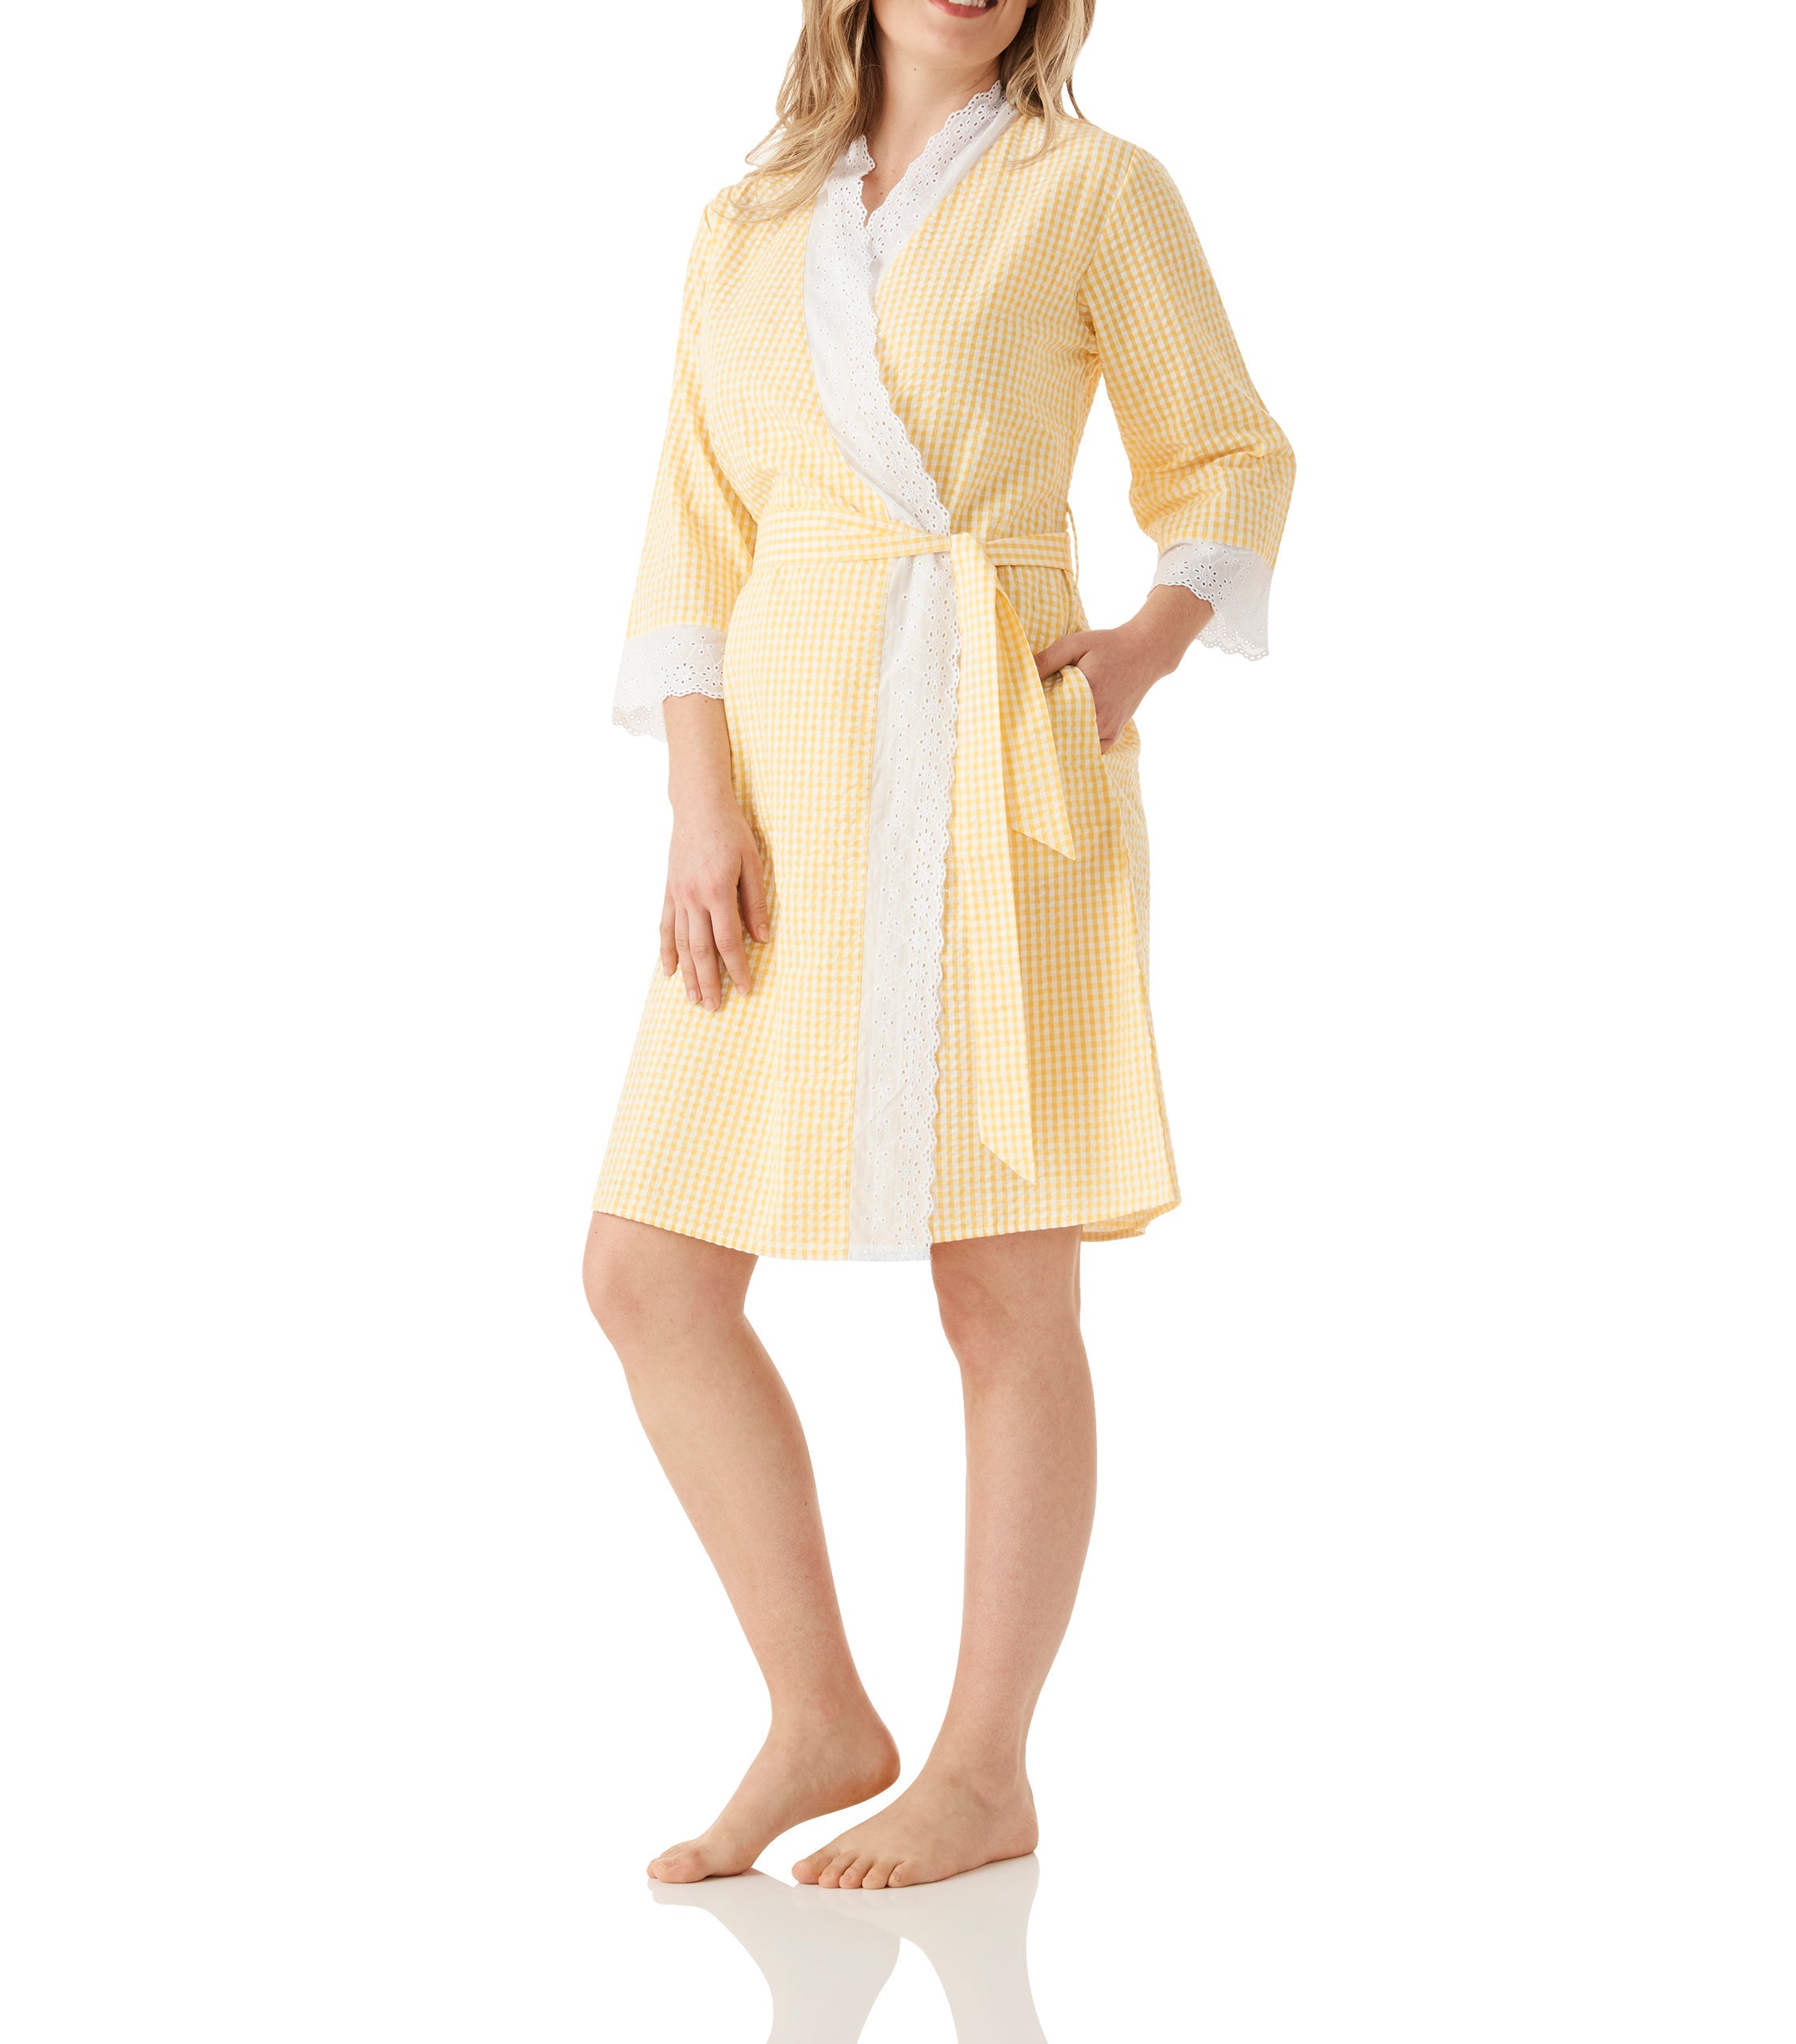 The best dressing gowns to keep you cosy at home | Daily Mail Online